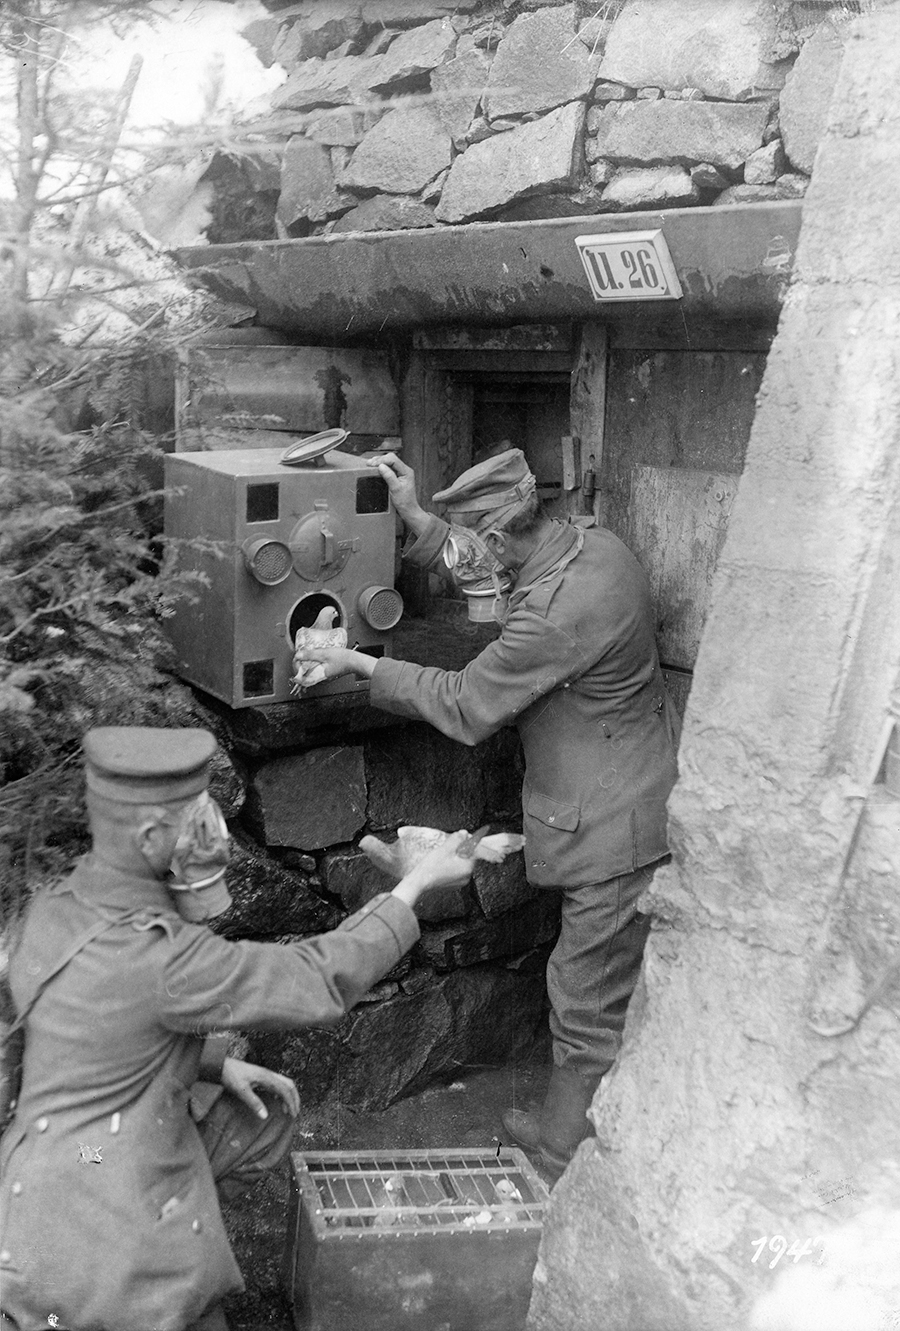 The mutual proliferation of chemical warfare imposed myriad new precautions on both sides. Here German troops transfer their carrier pigeons to a special box to protect the birds against a gas attack expected in March 1917. (National Archives)